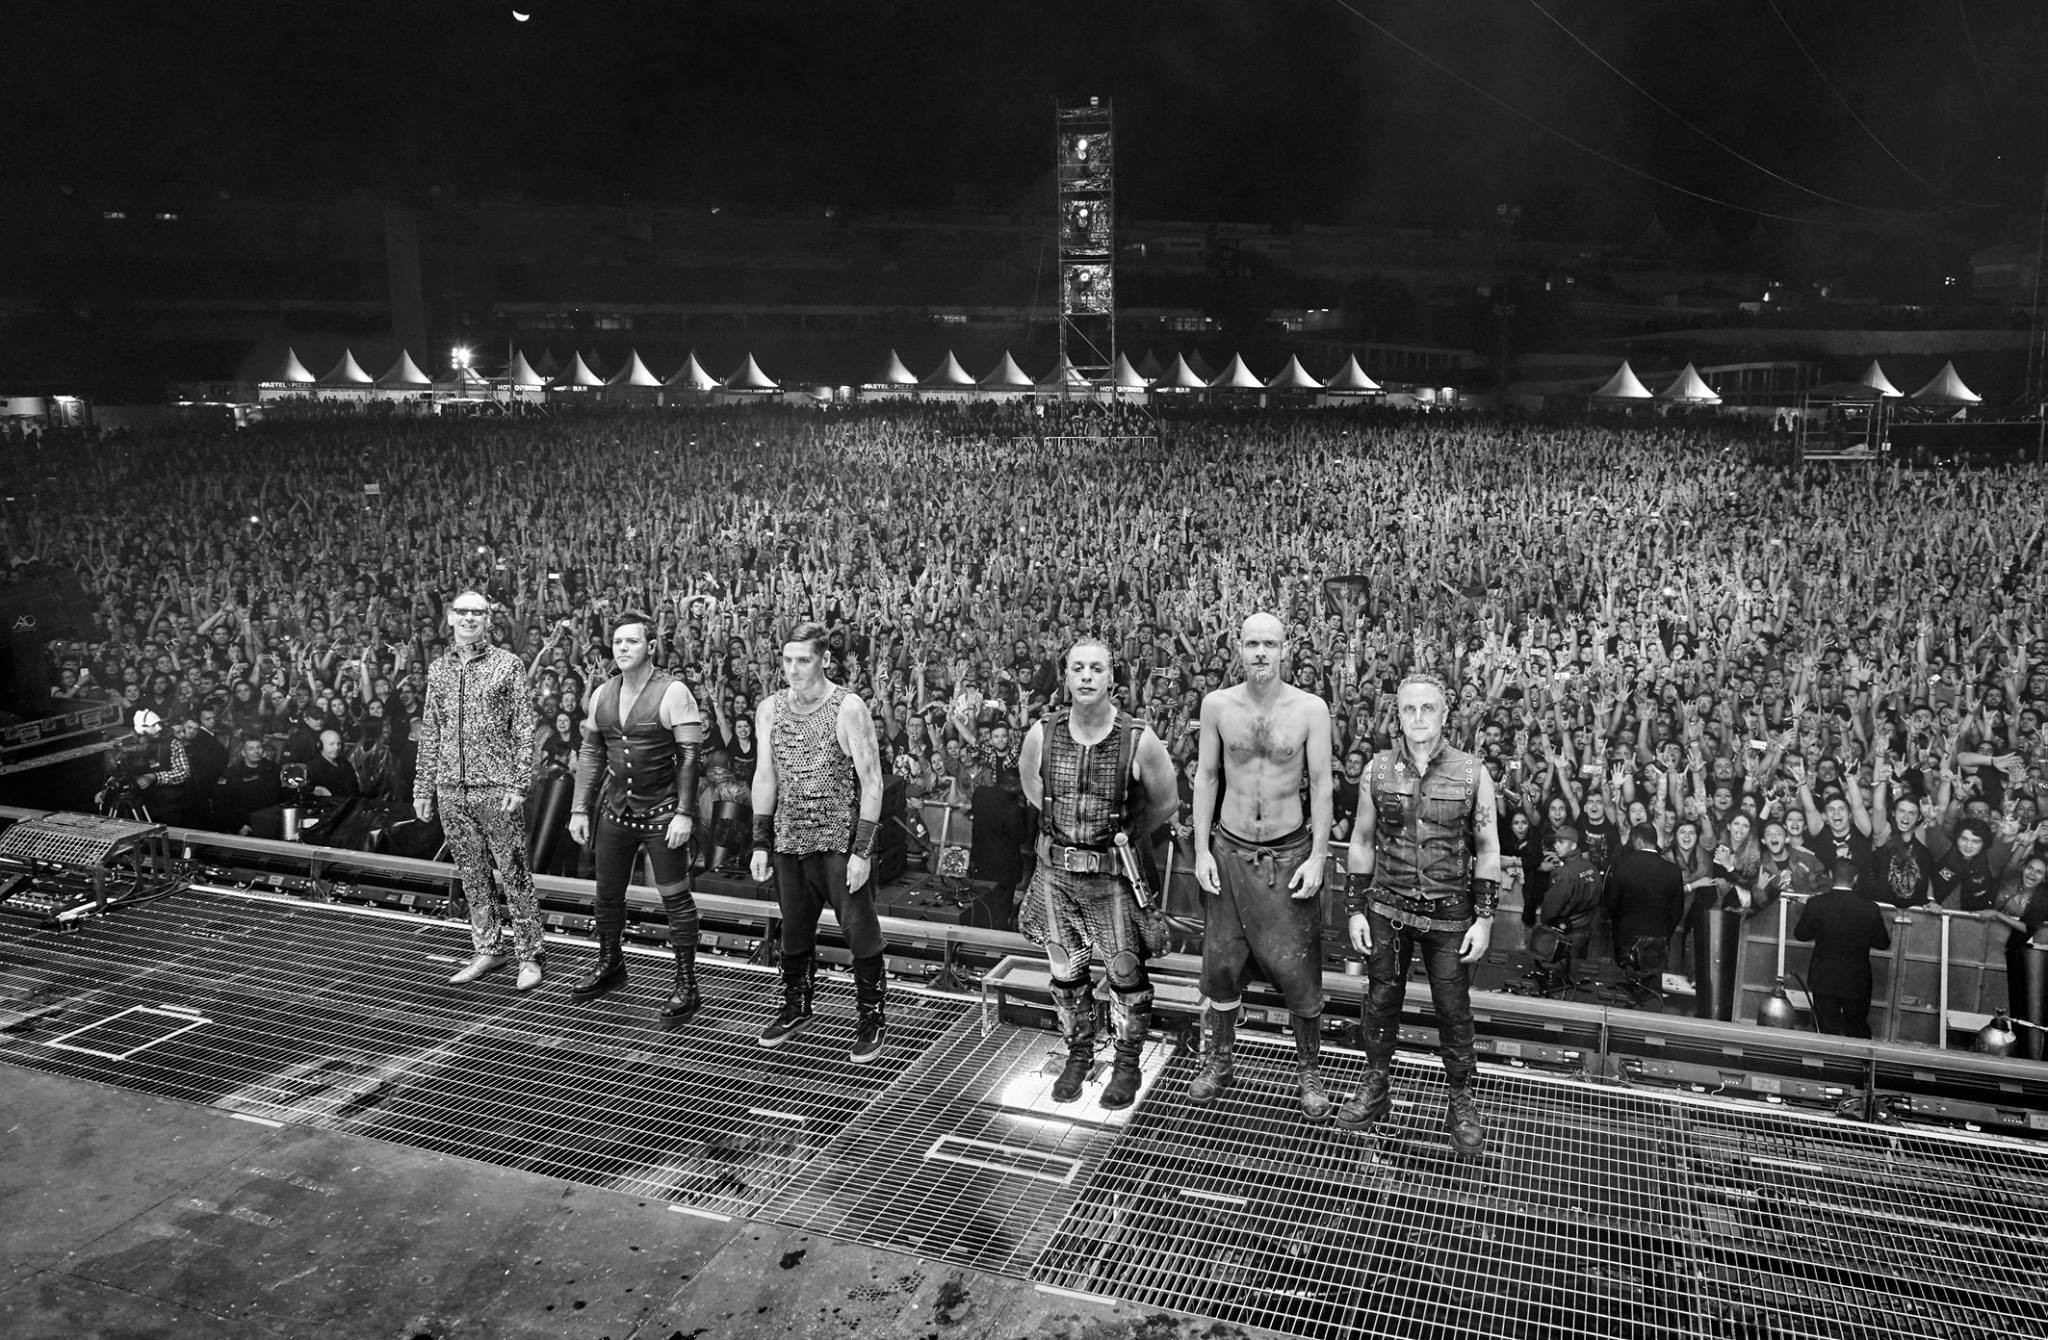 People 2048x1340 Rammstein metal band concerts Till Lindemann monochrome crowds band stages standing